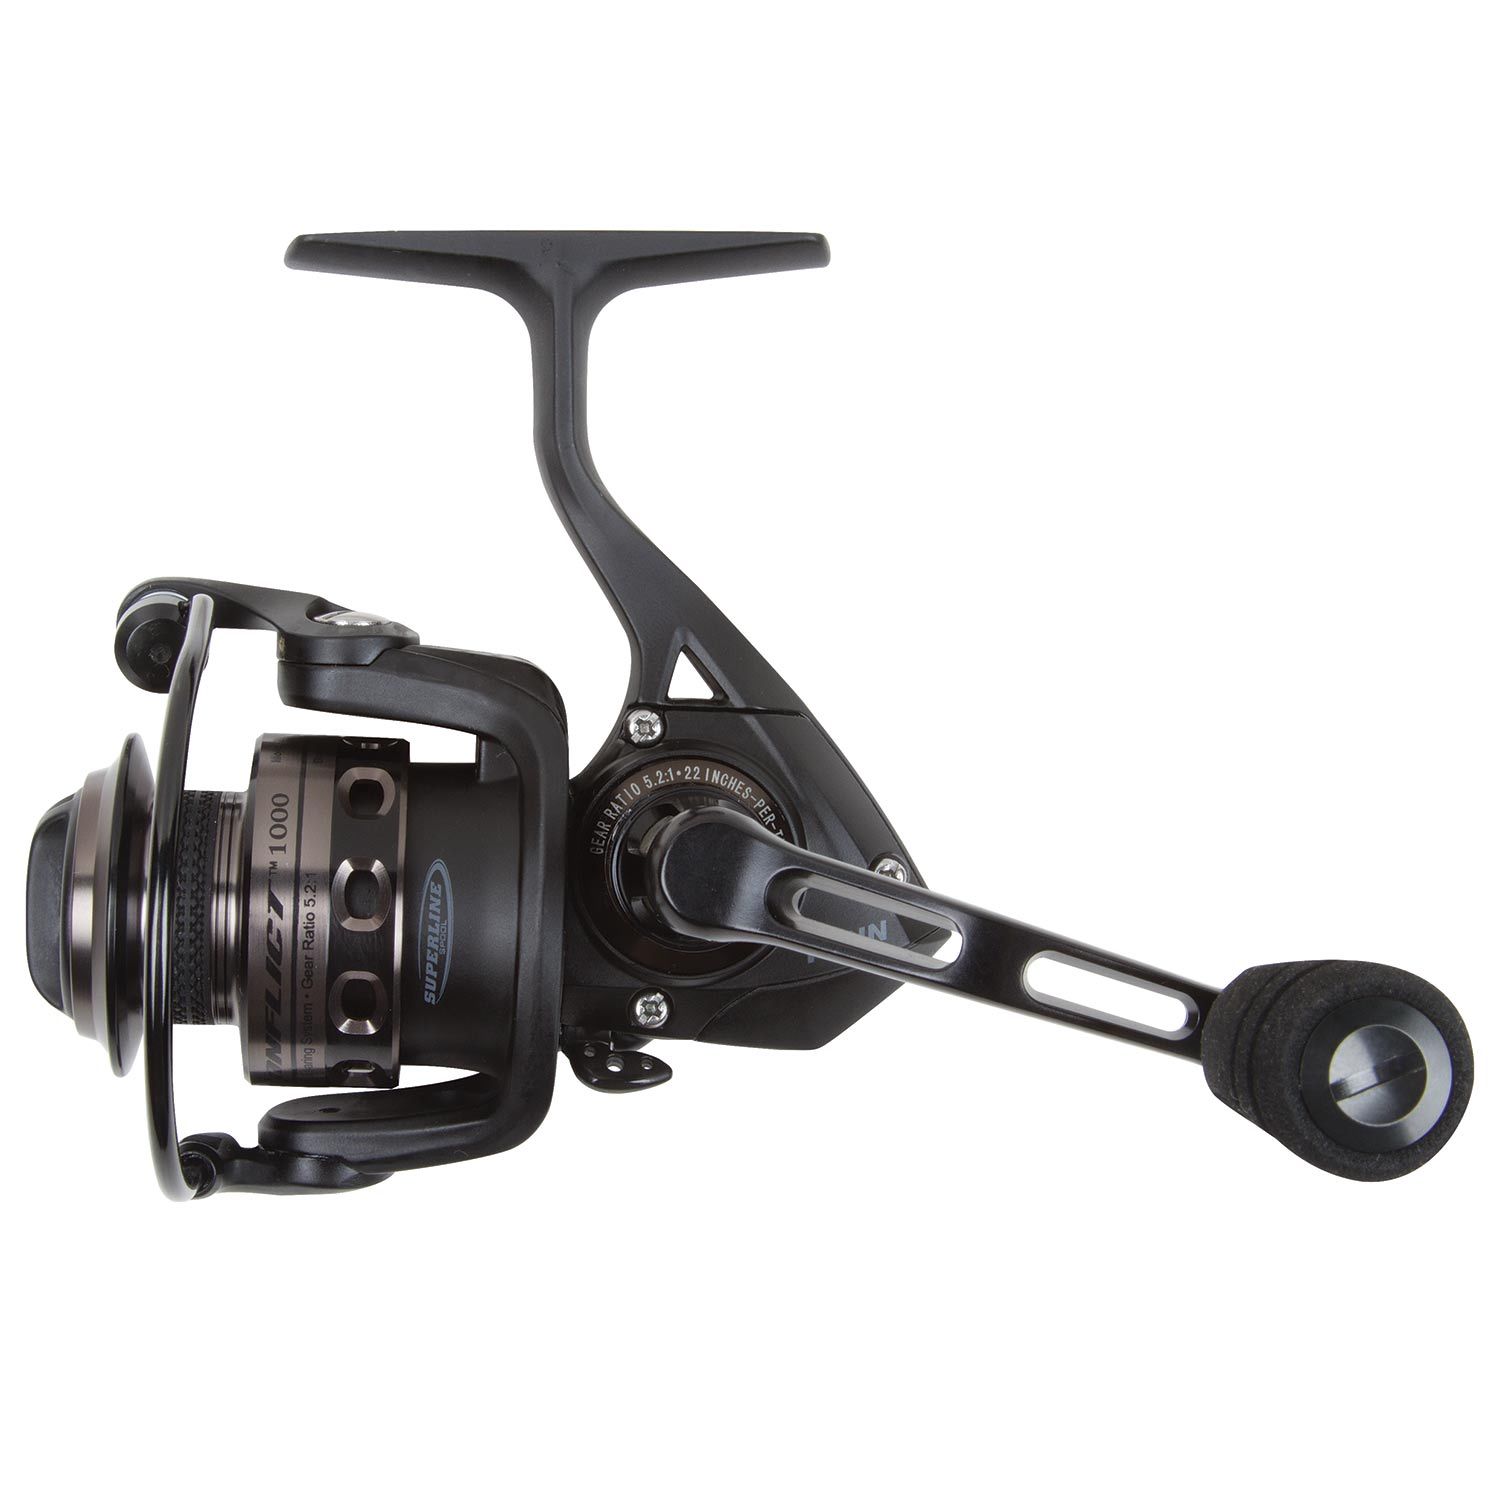 PENN Conflict Spinning Reel CFT4000, 7+1BB, 15 lbs Max Drag, 6.2:1